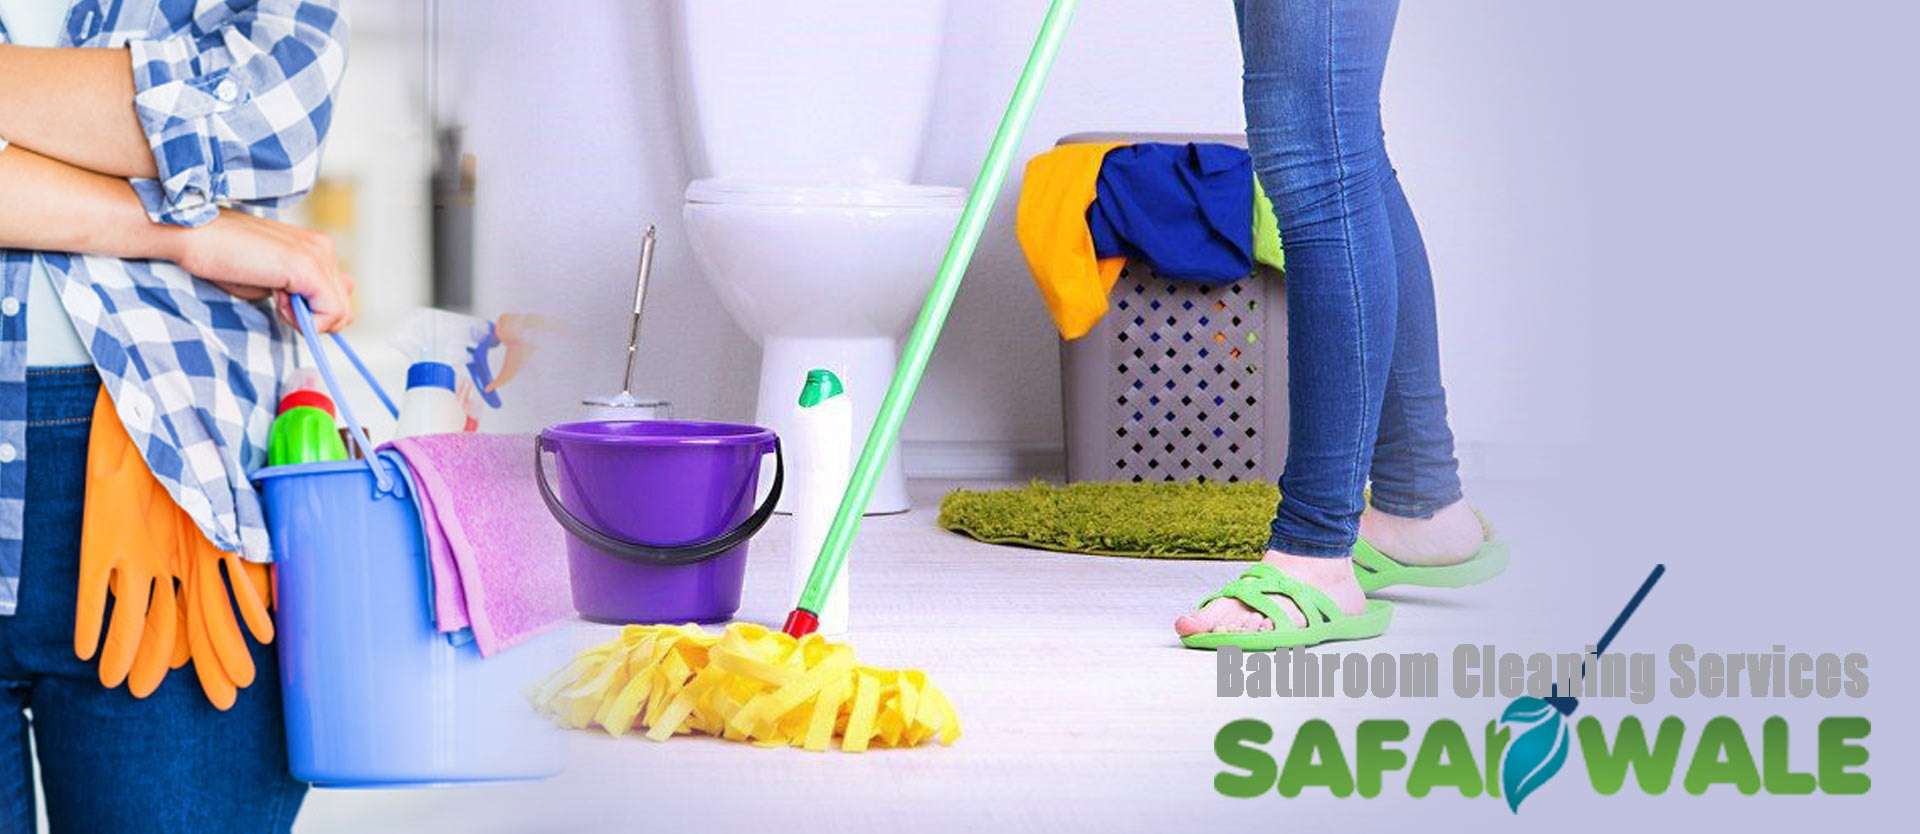 Bathroom Cleaning Services In Ramprastha, Ghaziabad